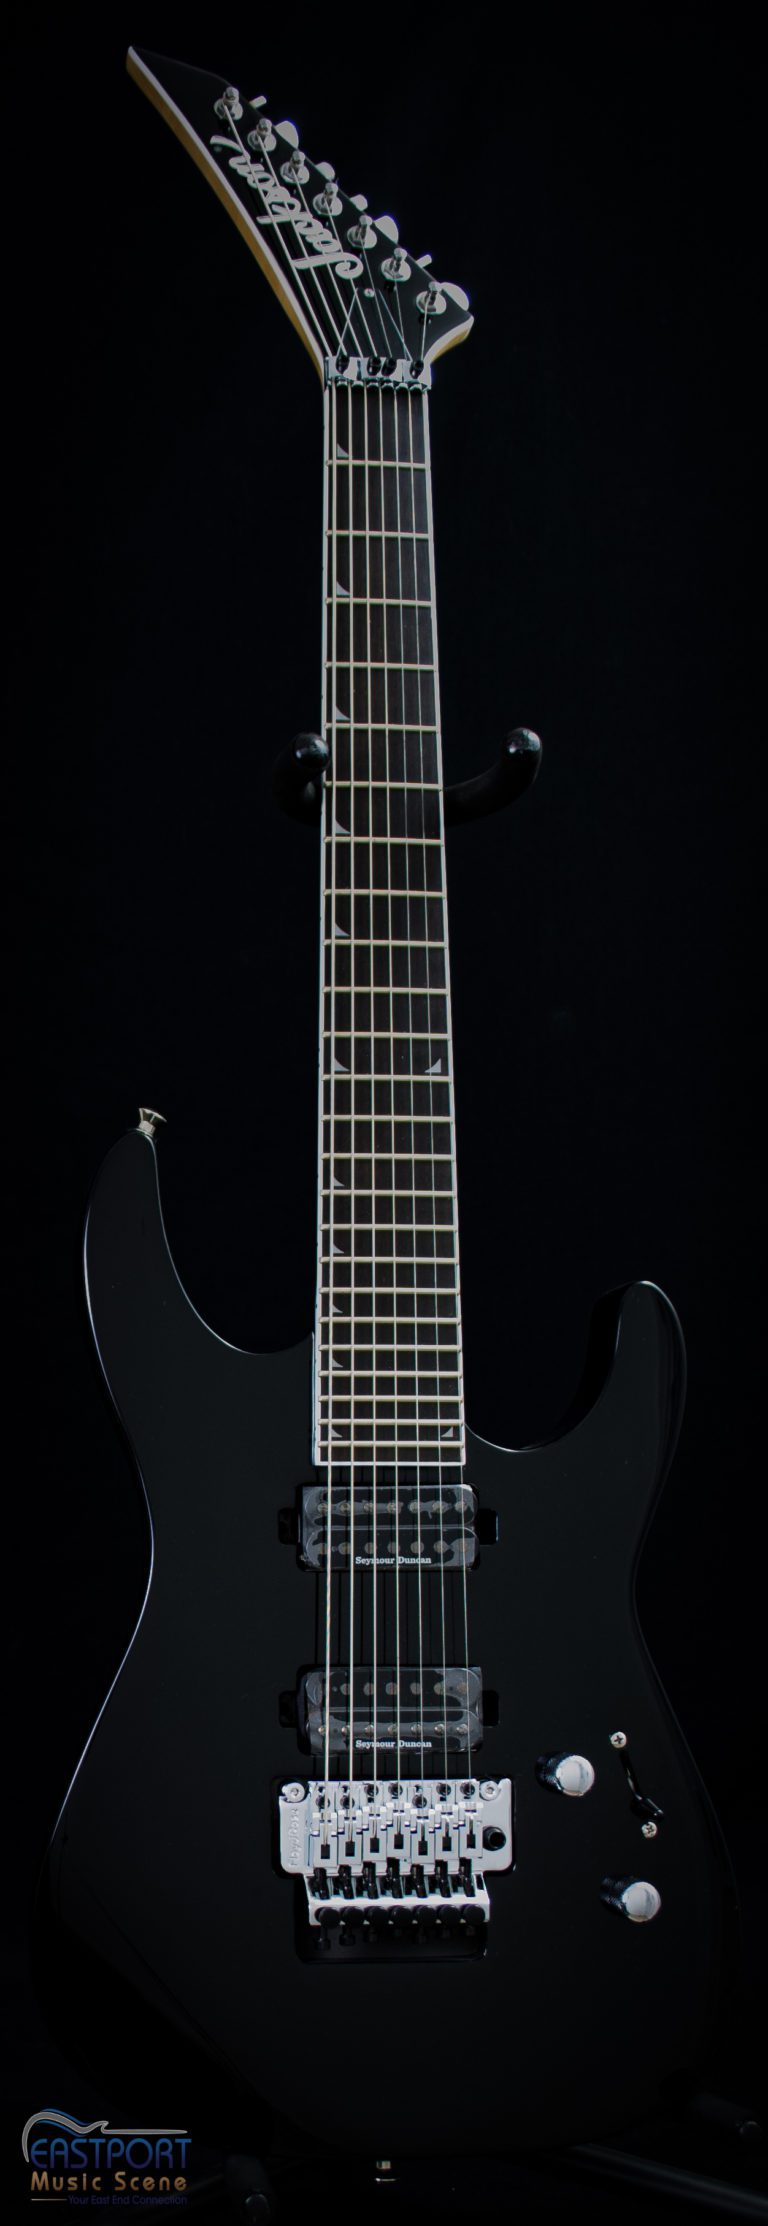 A black guitar is shown against a black background.